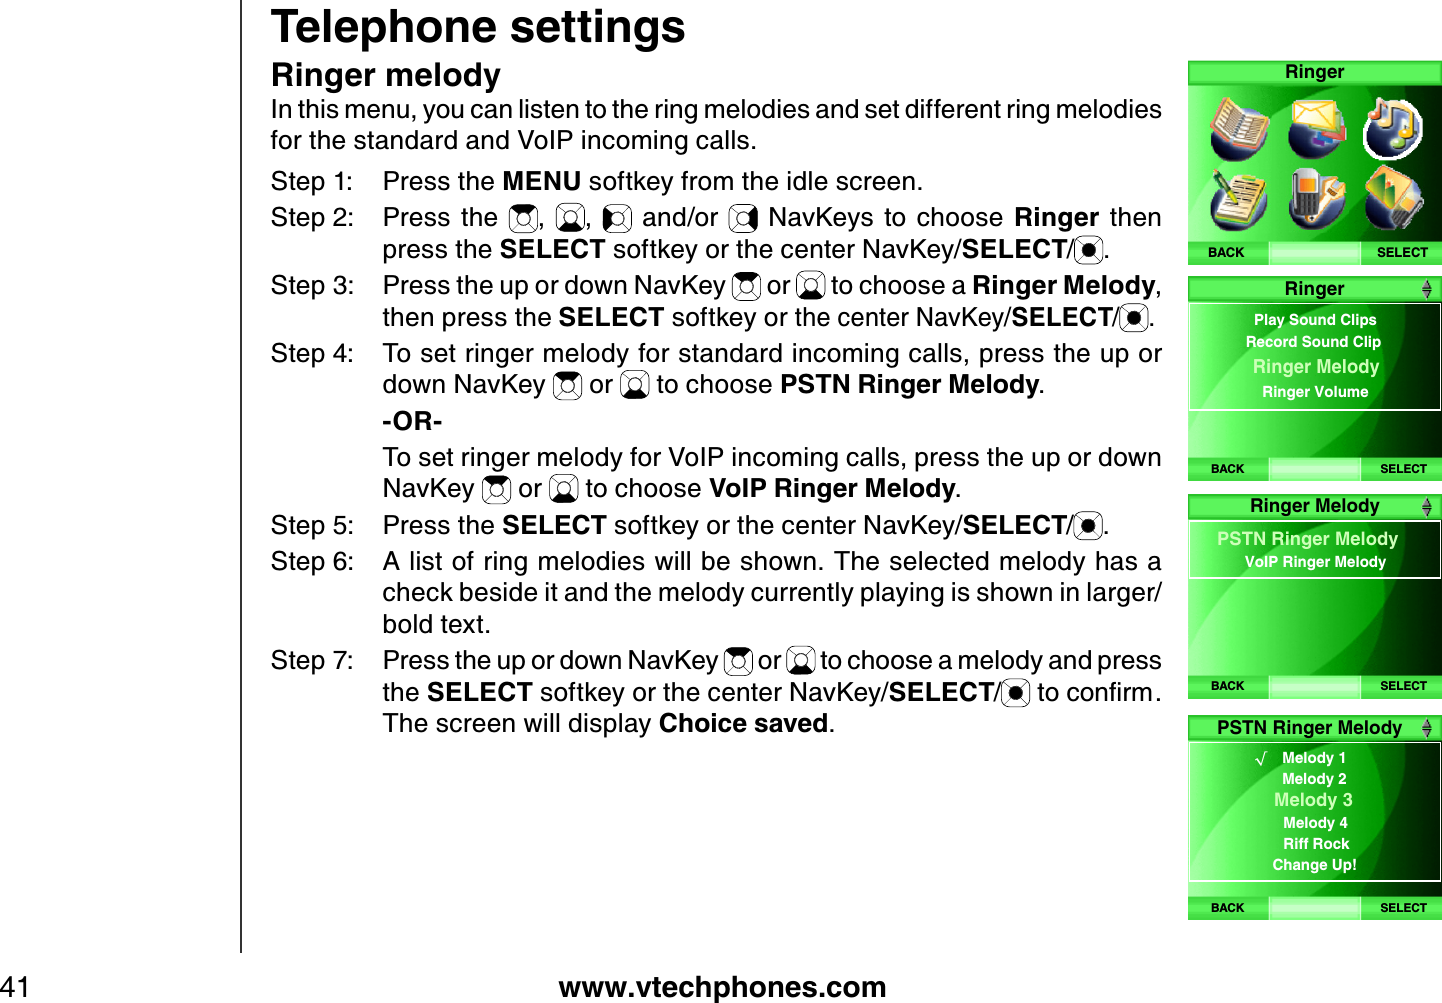 www.vtechphones.com41Telephone settingsRinger melodyIn this menu, you can listen to the ring melodies and set different ring melodies for the standard and VoIP incoming calls.Step 1: Press the MENU softkey from the idle screen.Step 2: Press  the  , ,   and/or    NavKeys to  choose  Ringer  then press the SELECT softkey or the center NavKey/SELECT/.Step 3: Press the up or down NavKey   or   to choose a Ringer Melody,then press the SELECT softkey or the center NavKey/SELECT/ .Step 4: To set ringer melody for standard incoming calls, press the up or down NavKey   or   to choose PSTN Ringer Melody.    -OR-    To set ringer melody for VoIP incoming calls, press the up or down NavKey   or   to choose VoIP Ringer Melody.Step 5: Press the SELECT softkey or the center NavKey/SELECT/.Step 6: A list of ring melodies will be shown. The selected melody has a check beside it and the melody currently playing is shown in larger/bold text.Step 7: Press the up or down NavKey   or   to choose a melody and press the SELECT softkey or the center NavKey/SELECT/VQEQPſTOThe screen will display Choice saved.SELECTRingerBACKBACK SELECTRingerPlay Sound ClipsRinger MelodyRinger Volume Record Sound ClipBACK SELECTPSTN Ringer MelodyVoIP Ringer MelodyRinger MelodyBACK SELECTPSTN Ringer Melody√    Melody 1Melody 2     Melody 3  Melody 4 Riff Rock Change Up!